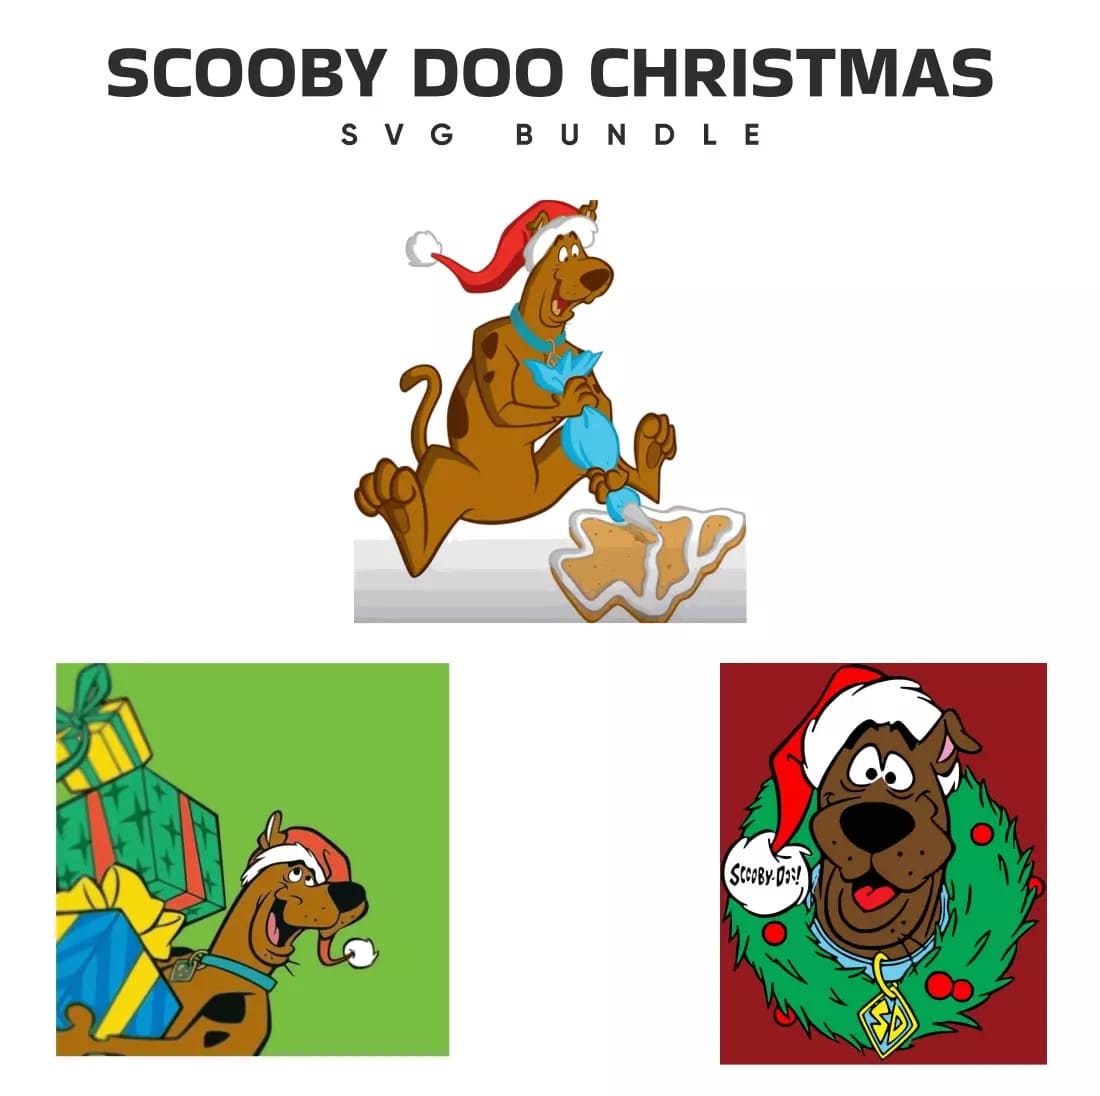 Scooby Doo Christmas SVG Bundle Preview.